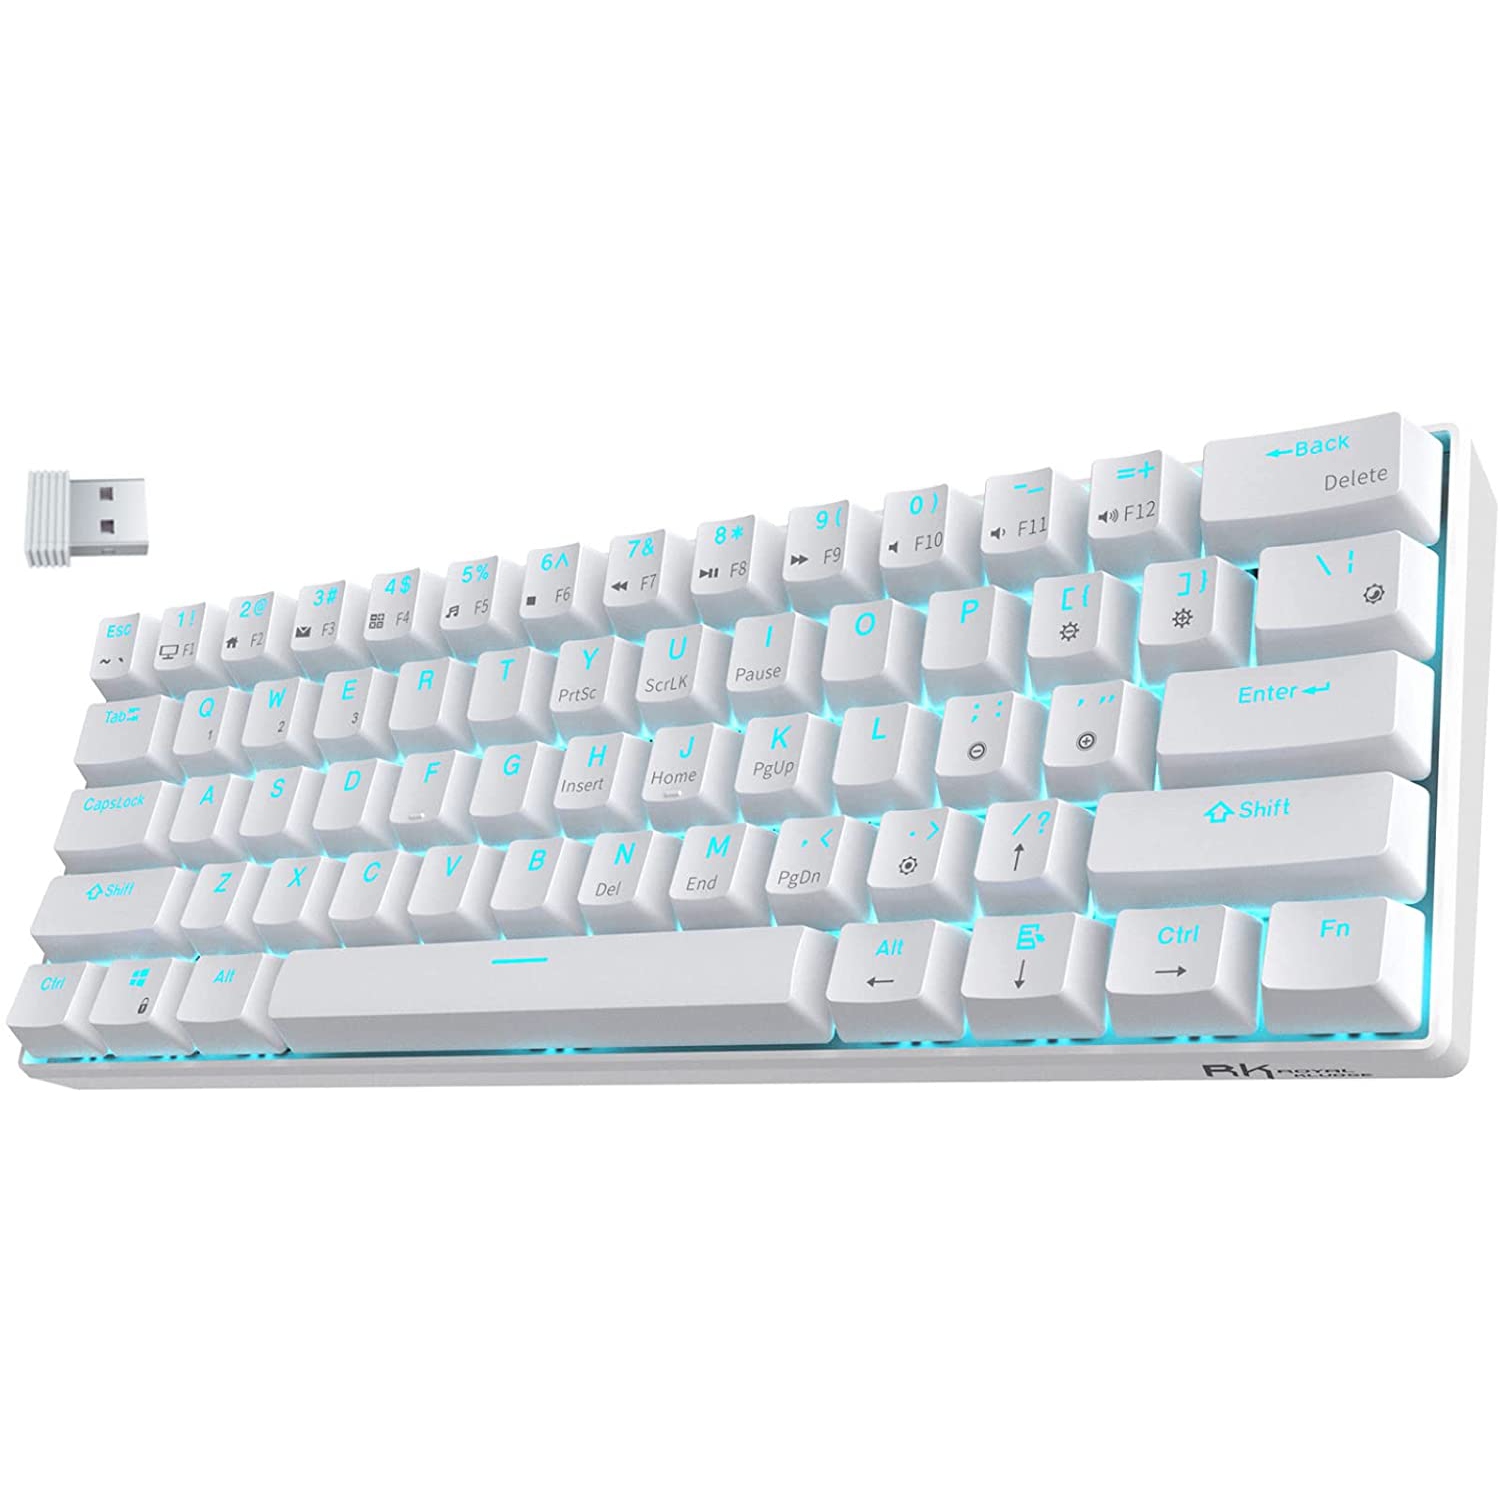 RK ROYAL KLUDGE RK61 Wireless 60% Triple Mode Mechanical Keyboard, 61 Keys Bluetooth Mechanical Keyboard, Brown Switches, Compact Gaming Keyboard with Programmable Software